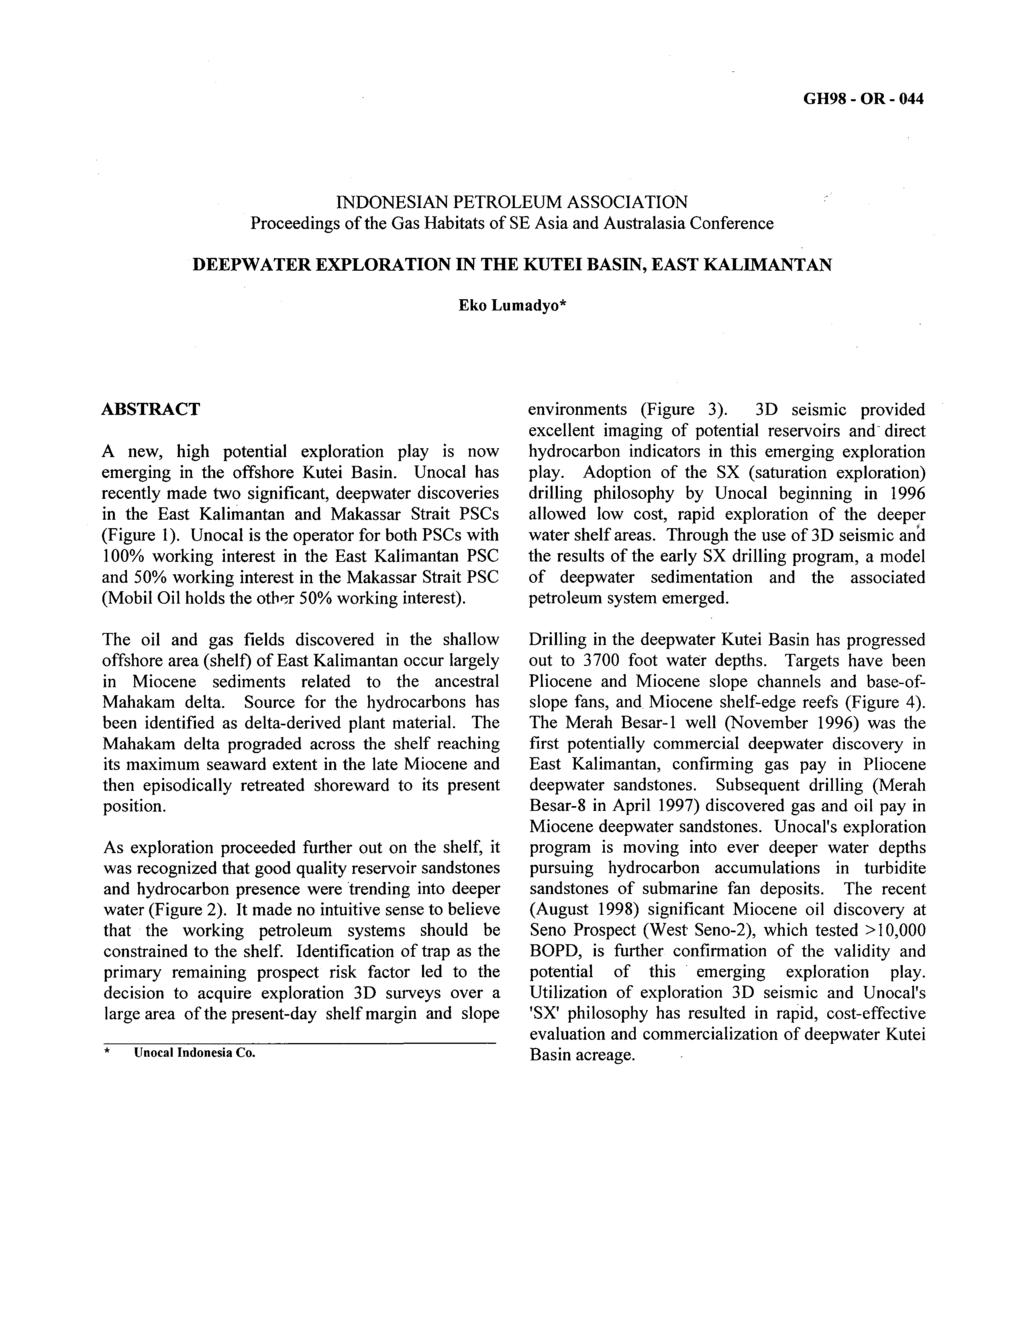 PA, 26 - Proceedings of an nternational Conference on Gas Habitats of SE Asia and Australasia, 1999 GH98 - OR - 44 NDONESAN PETROLEUM ASSOCATON Proceedings of the Gas Habitats of SE Asia and